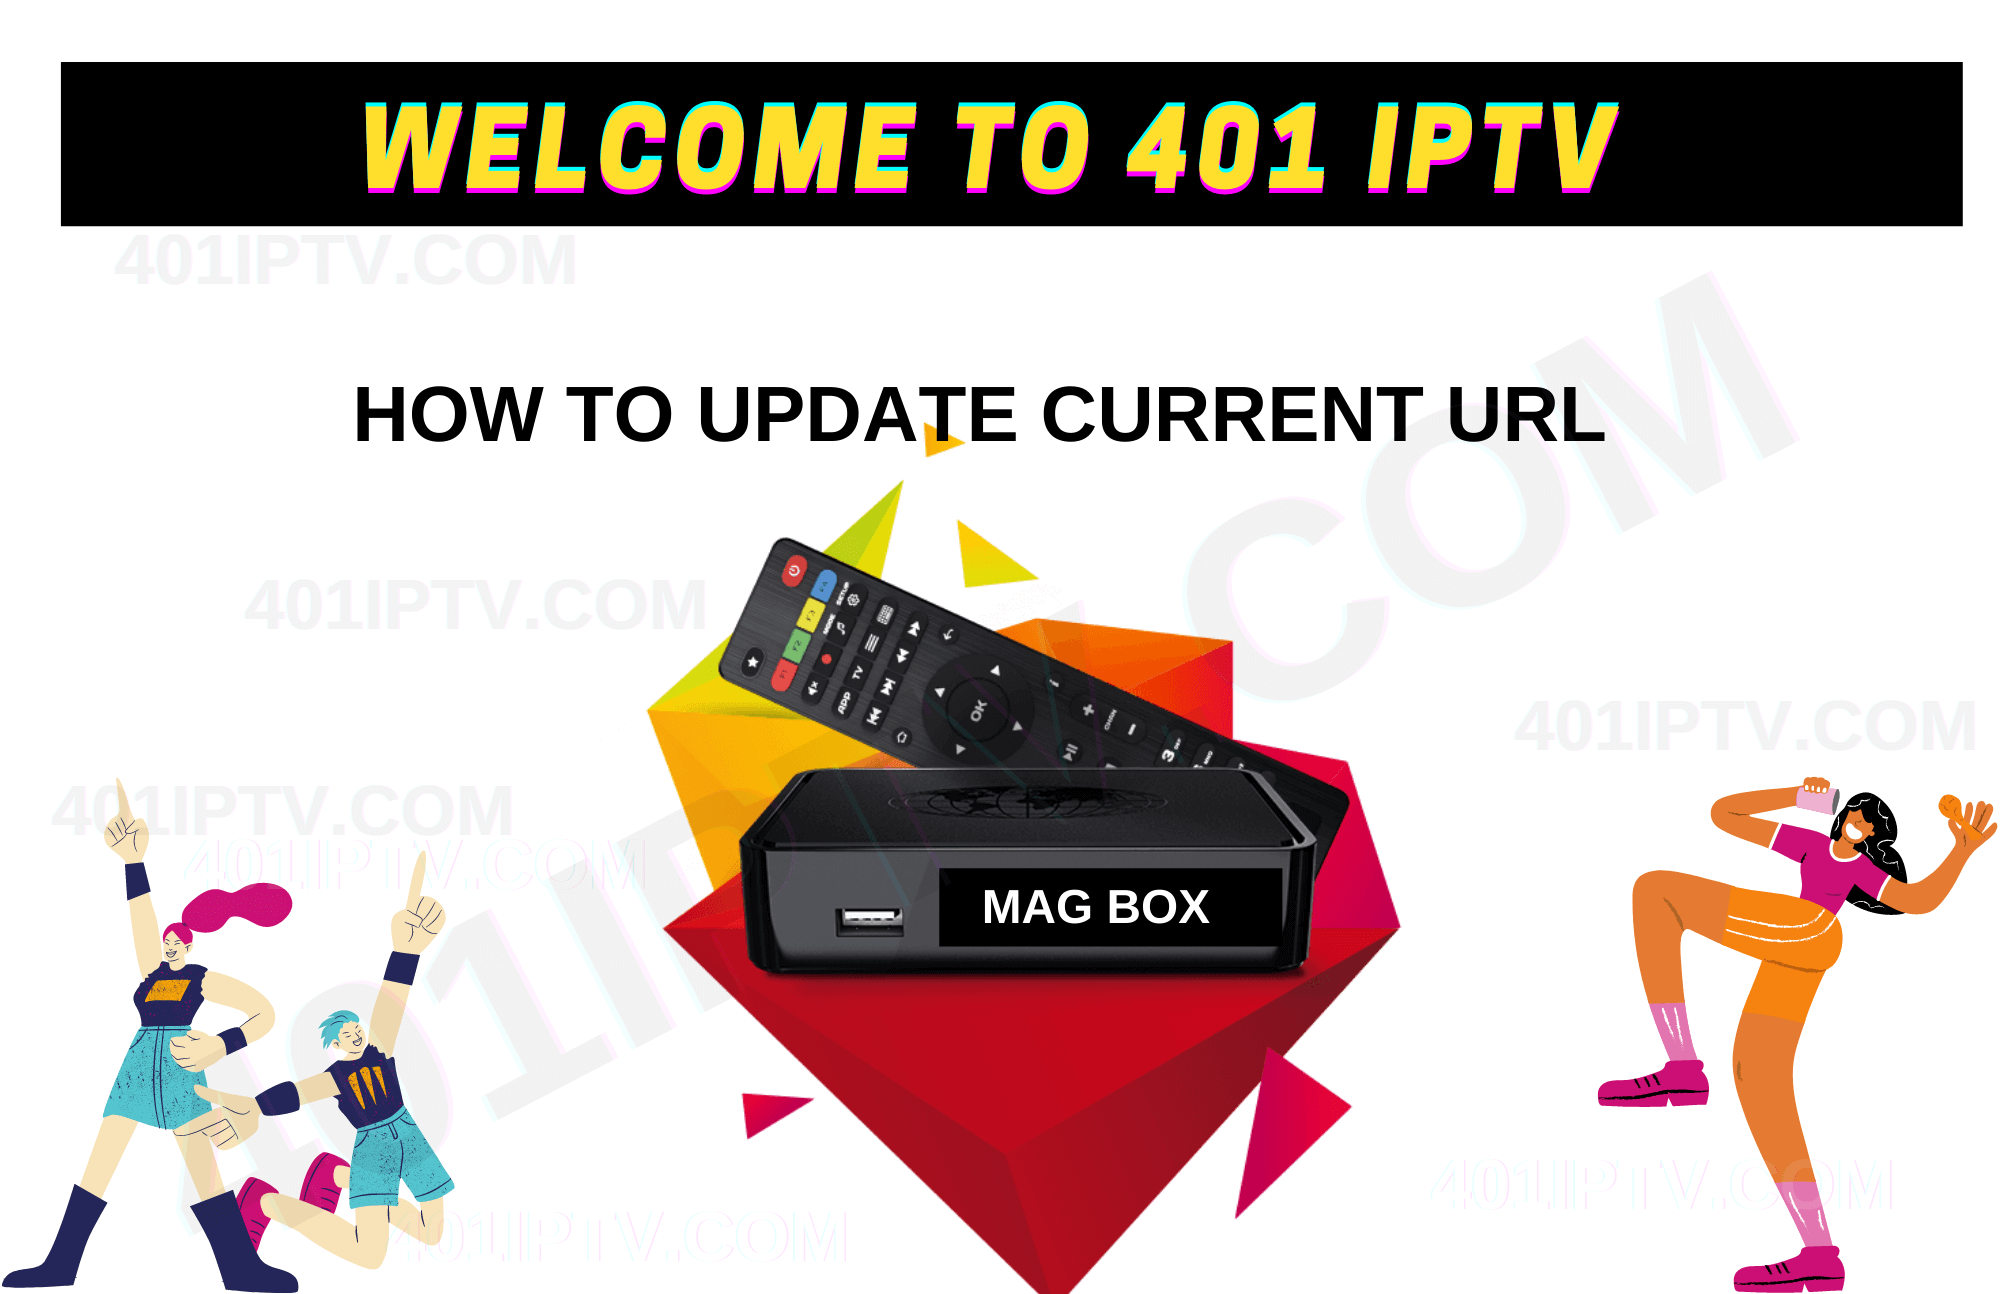 03 HOW TO SETUP MAG BOX CURRENT URL1